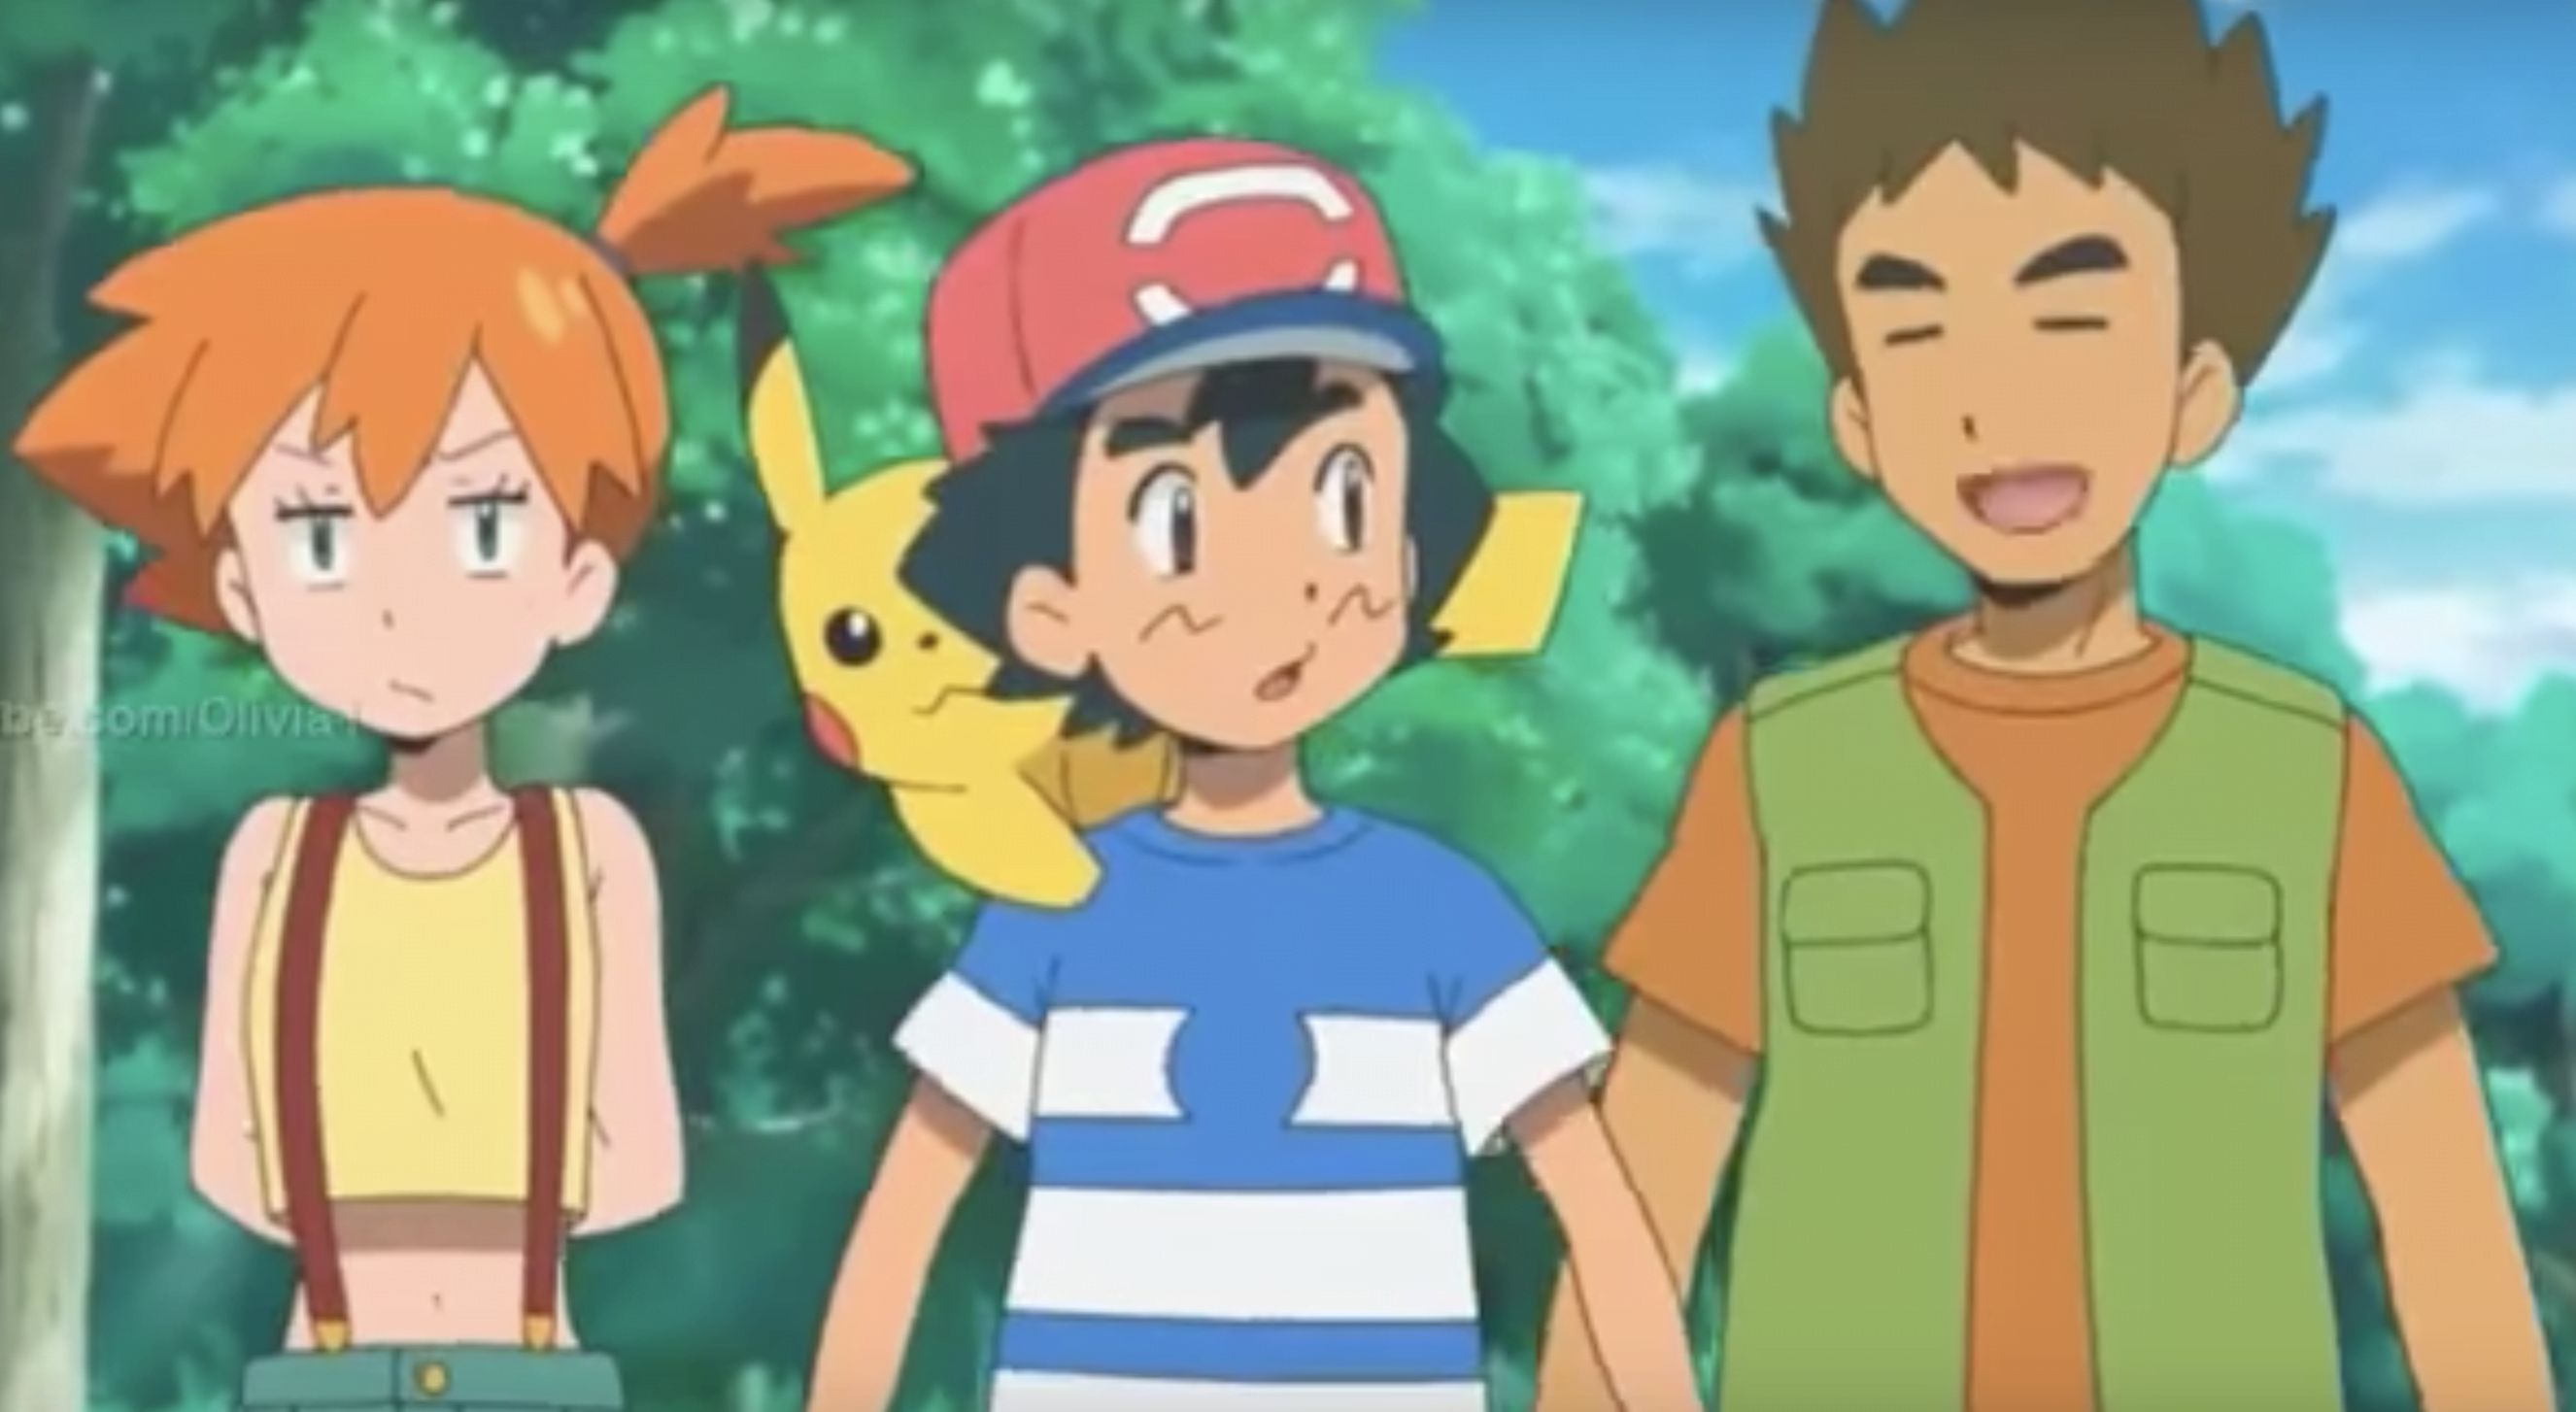 Pokémon's Dawn is So Much More Than a Misty Ripoff, & Pikachu Proves It